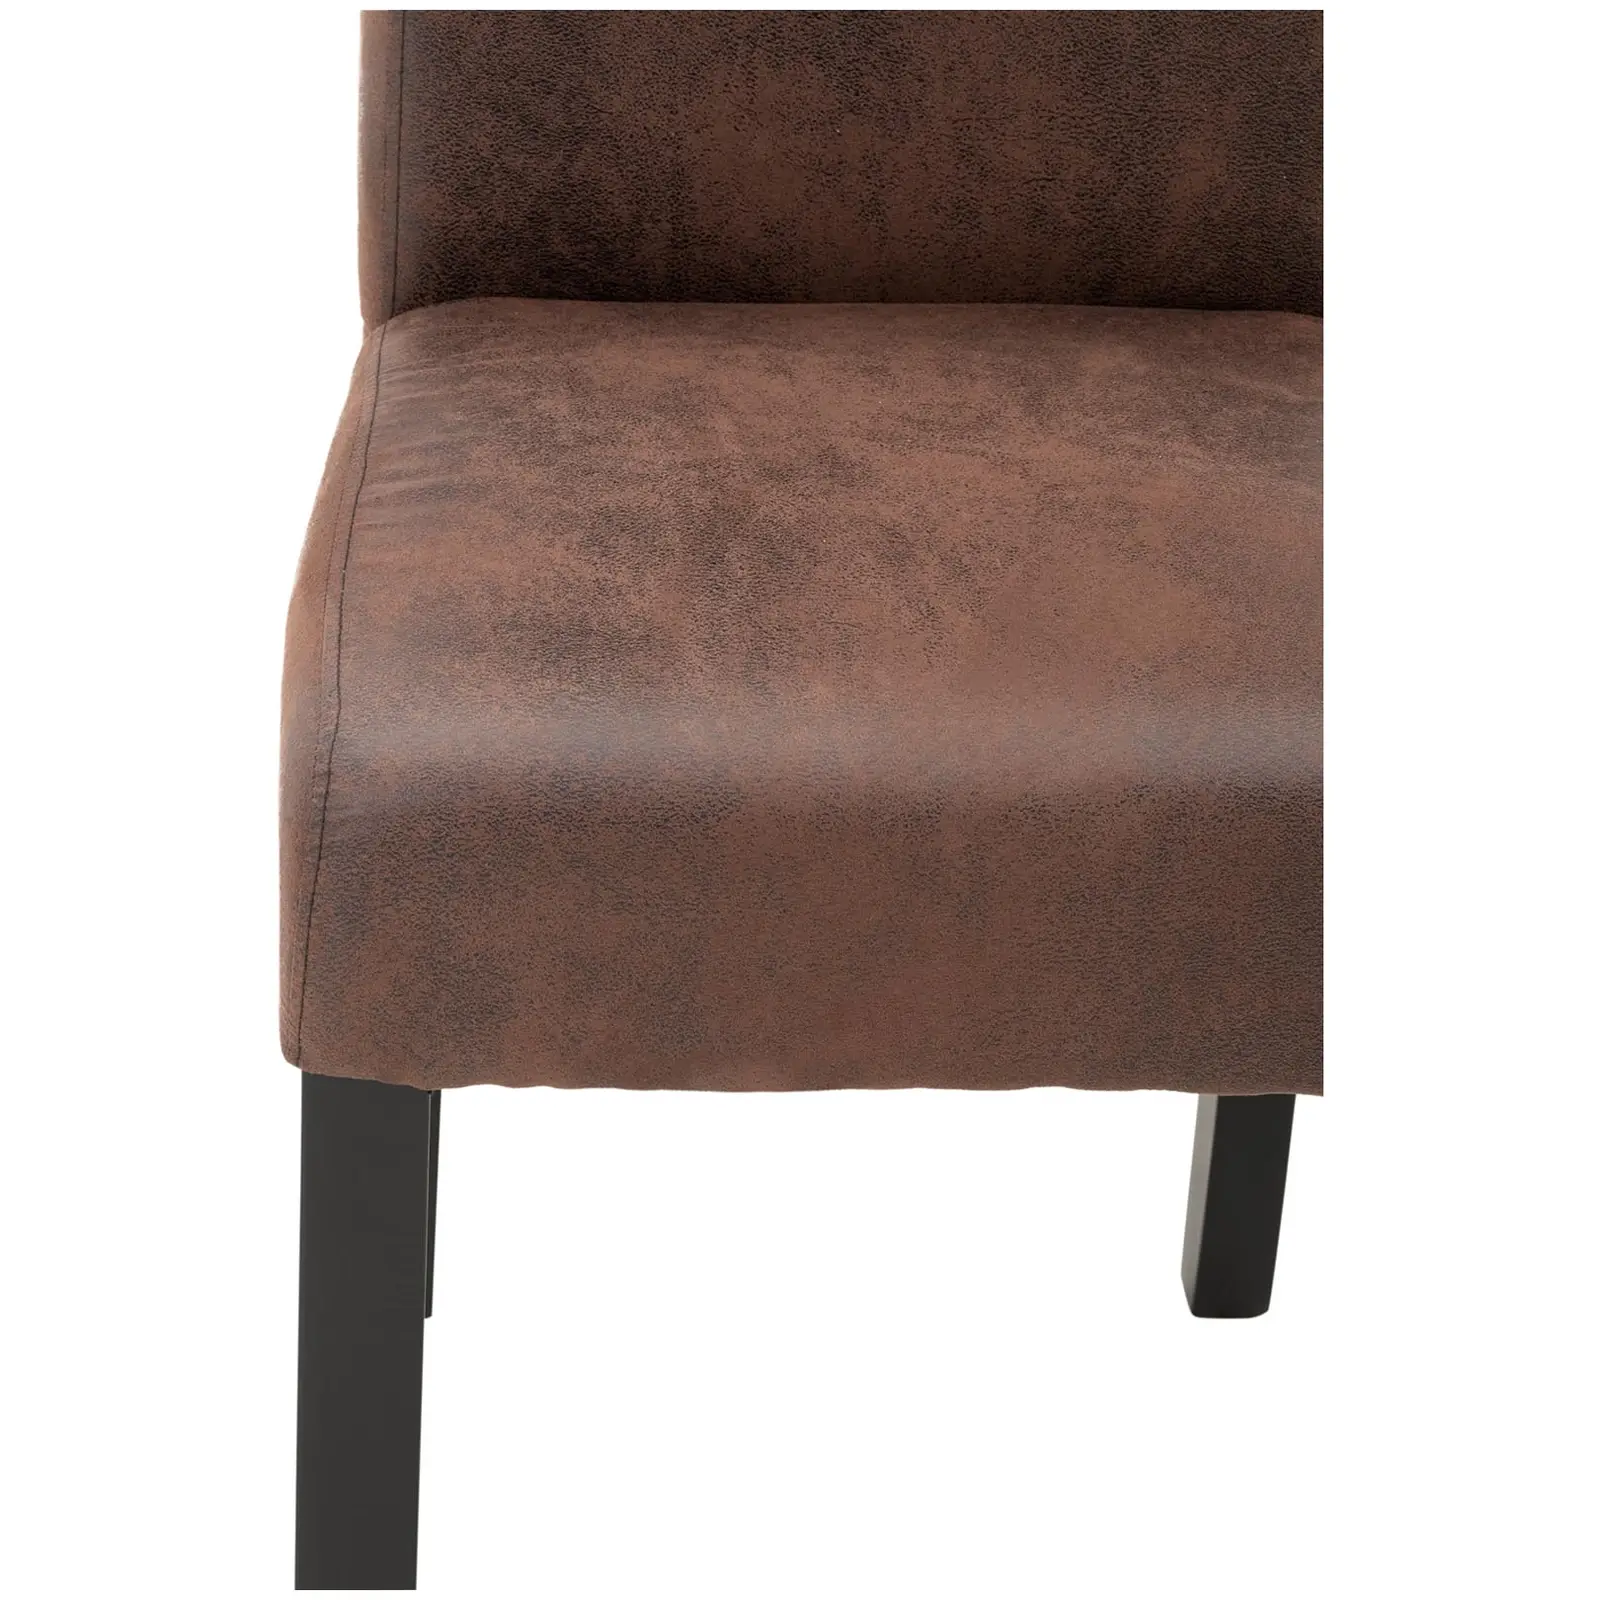 Upholstered Dining Chair - set of 2 - up to 150 kg - seat 44.5 x 44 cm - brown